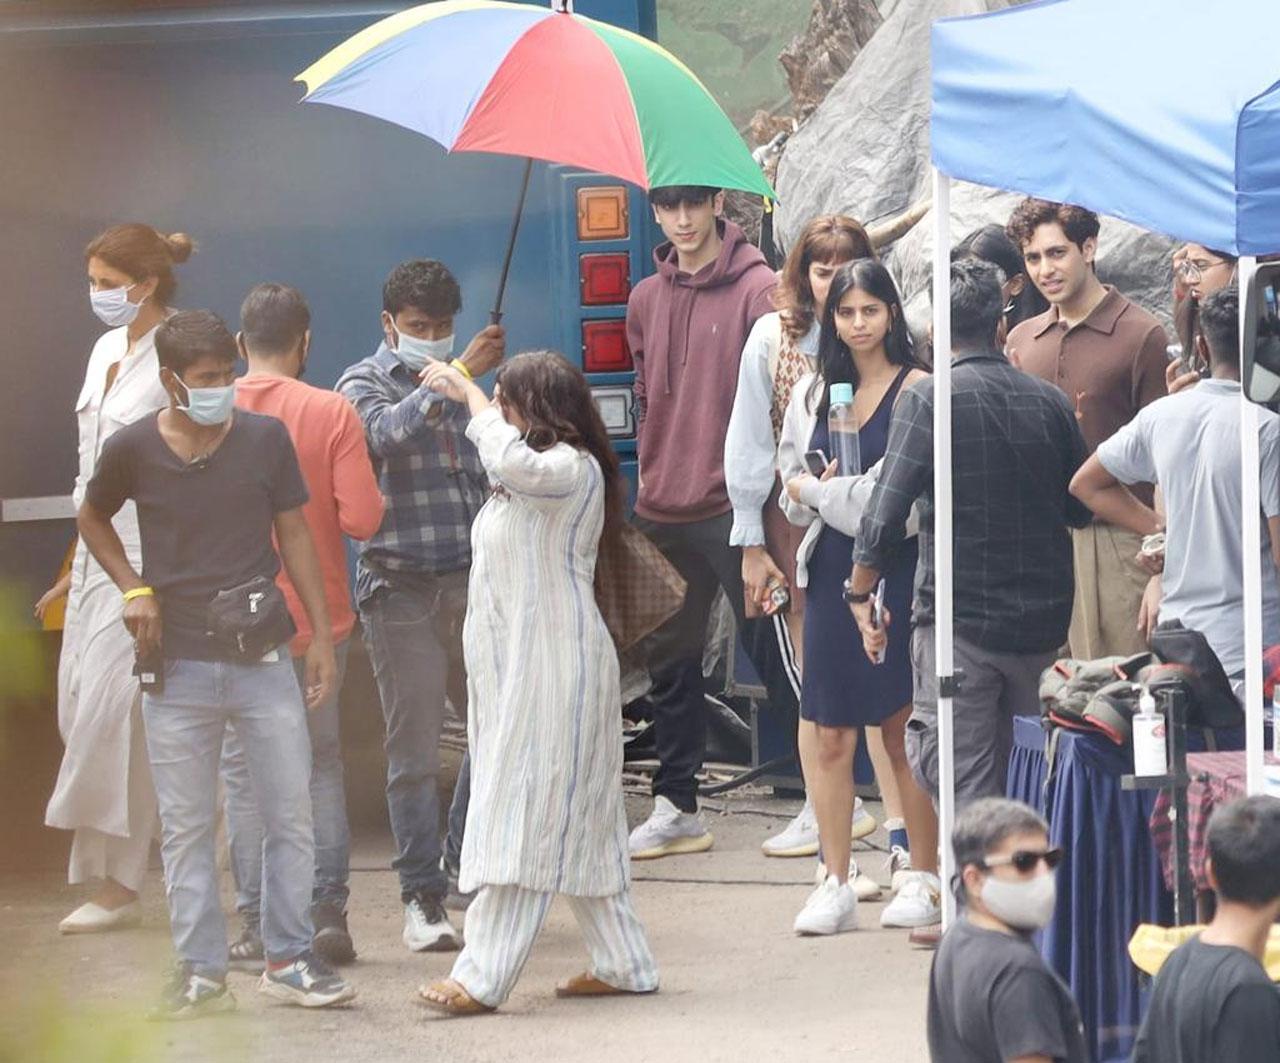 As seen in the photos, Khushi's look resembles that of Betty from 'Archie Comics', while Suhana seems to be playing Veronica. Agastya's elder sister Navya Nanda was also spotted in the pictures from the set. 